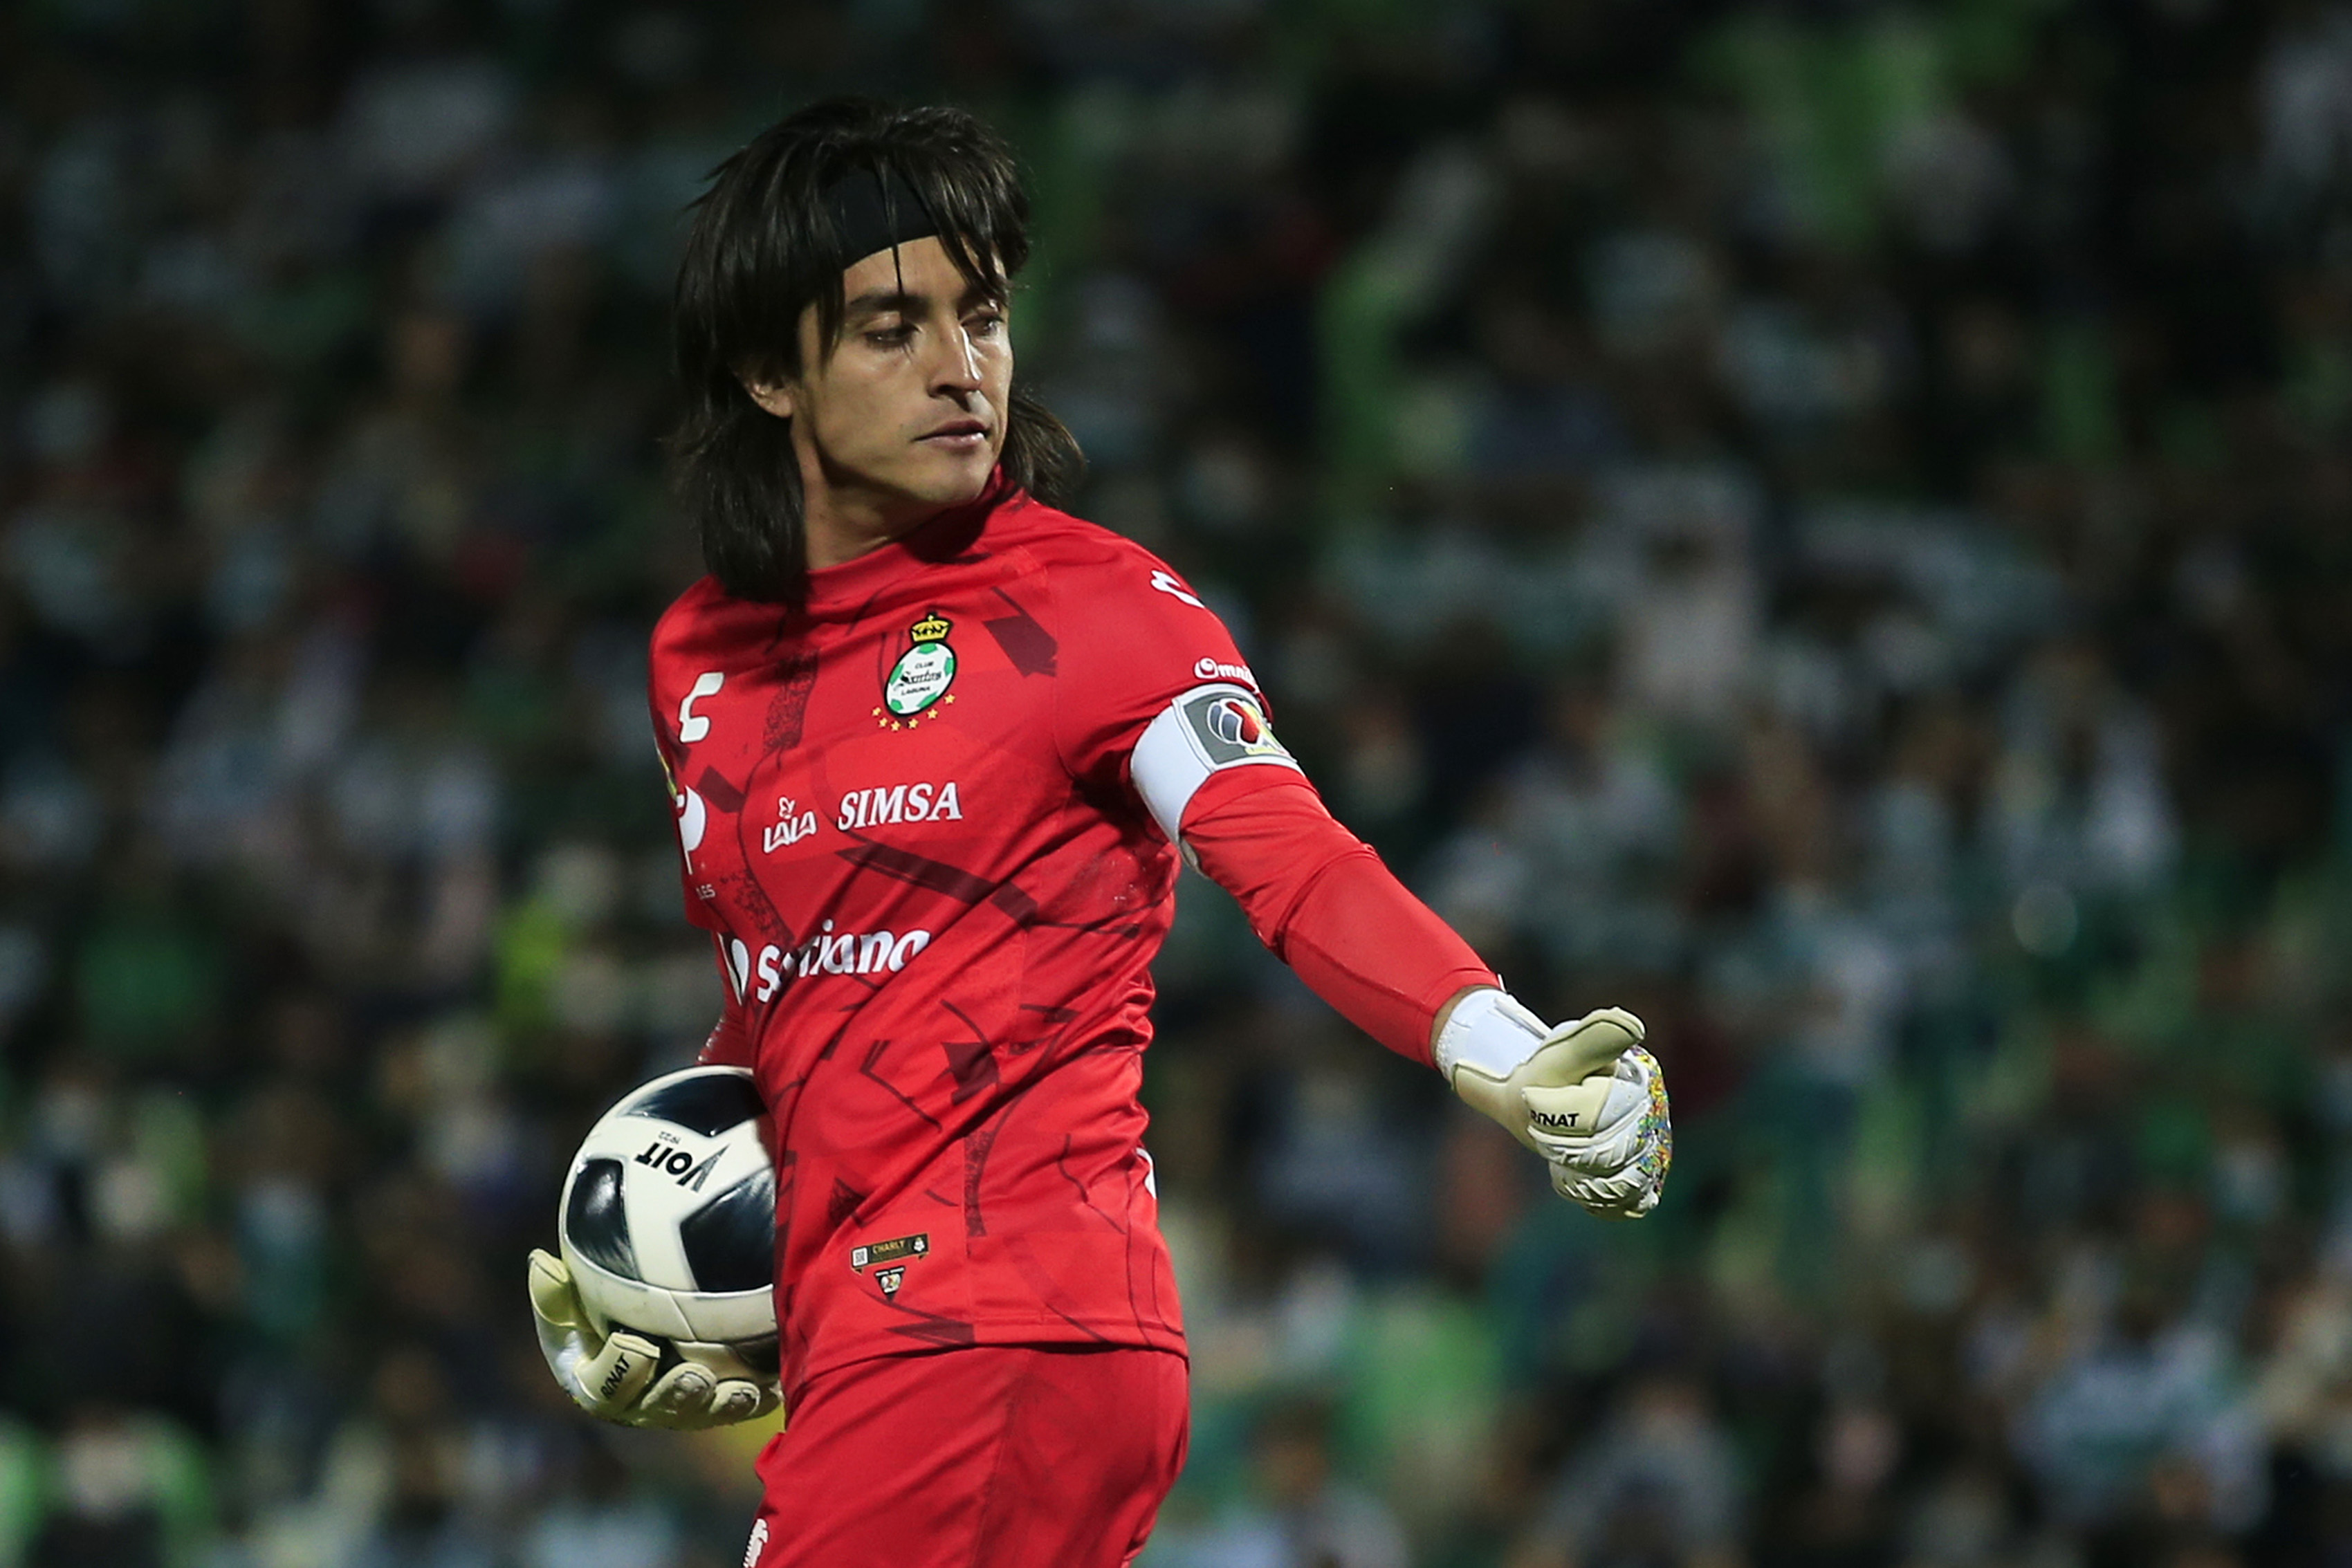 Carlos Acevedo, goalkeeper of Santos, controls the ball during the 17th round match between Santos Laguna and Atletico San Luis as part of the Torneo Grita Mexico A21 Liga MX at Corona Stadium on November 7, 2021 in Torreon, Mexico.